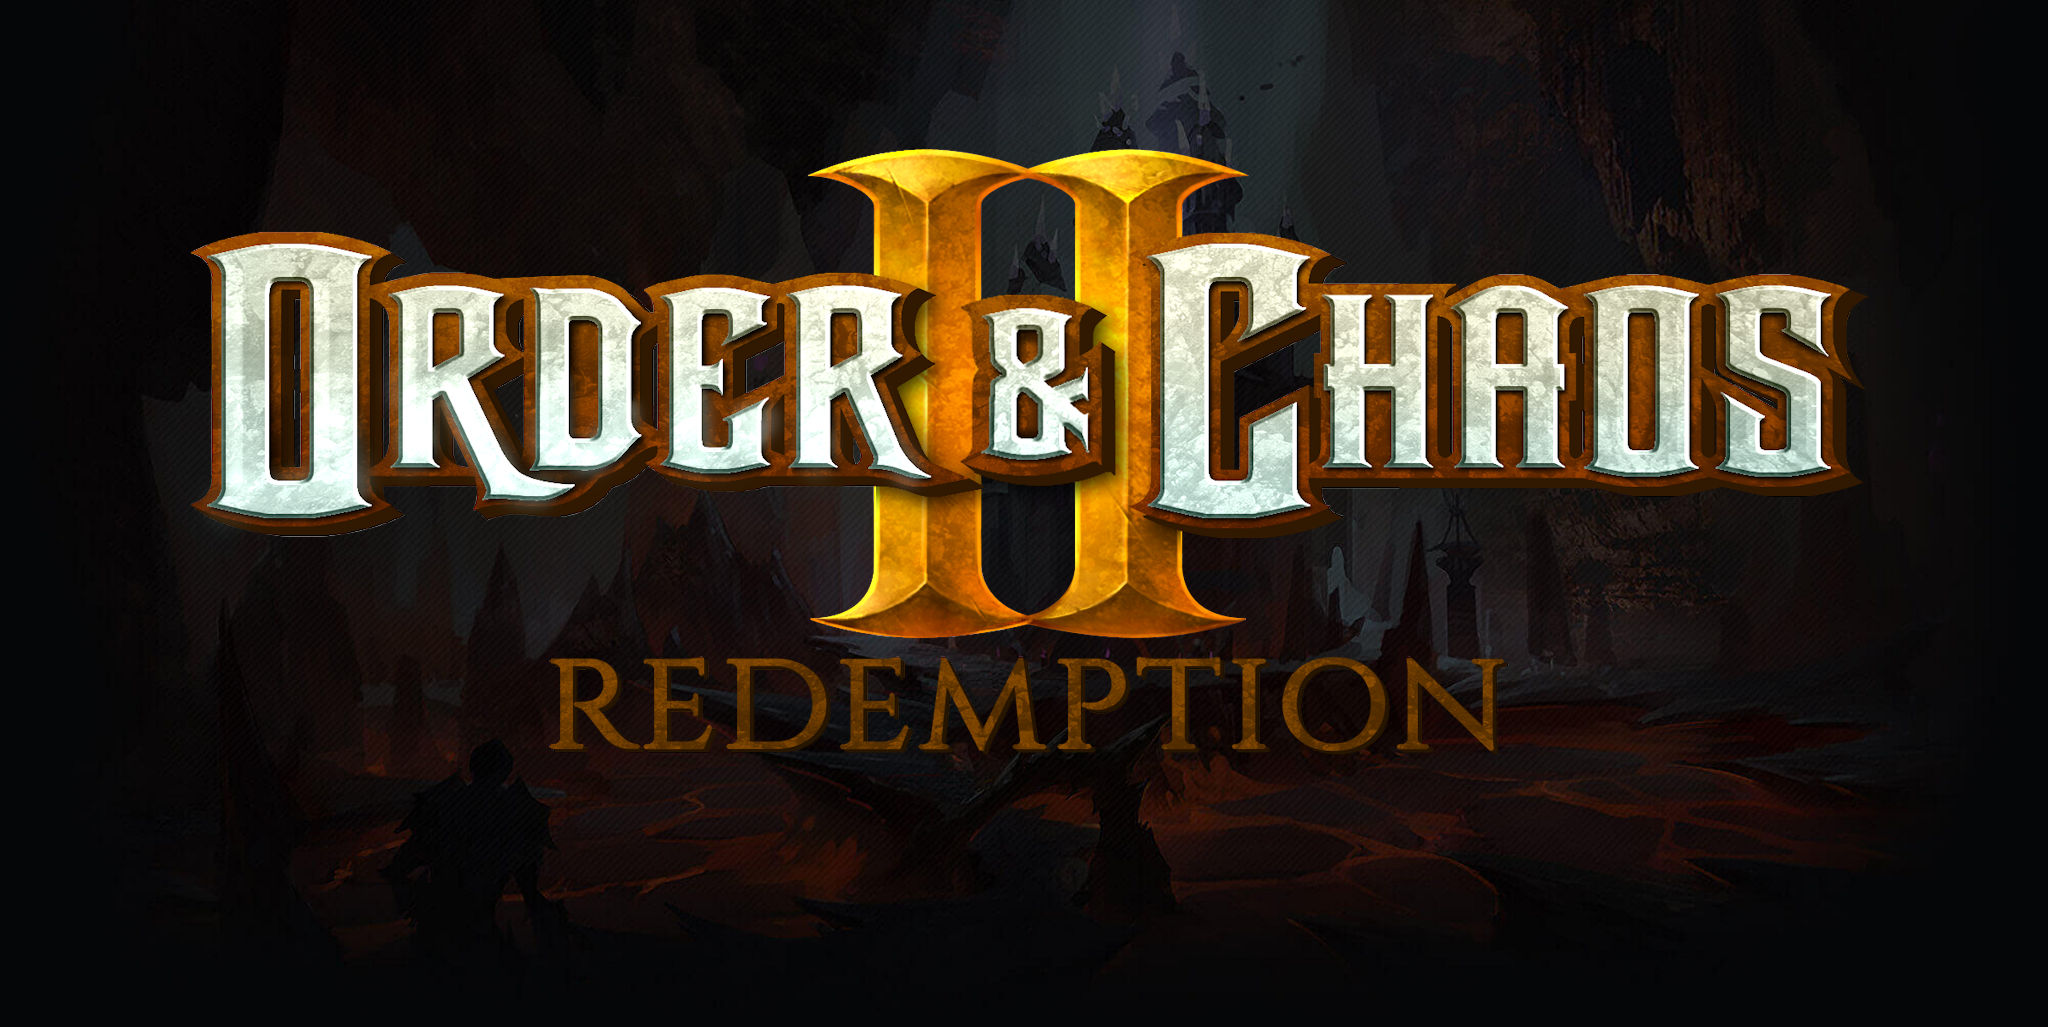 Order & Chaos Online 2 Redemption announced